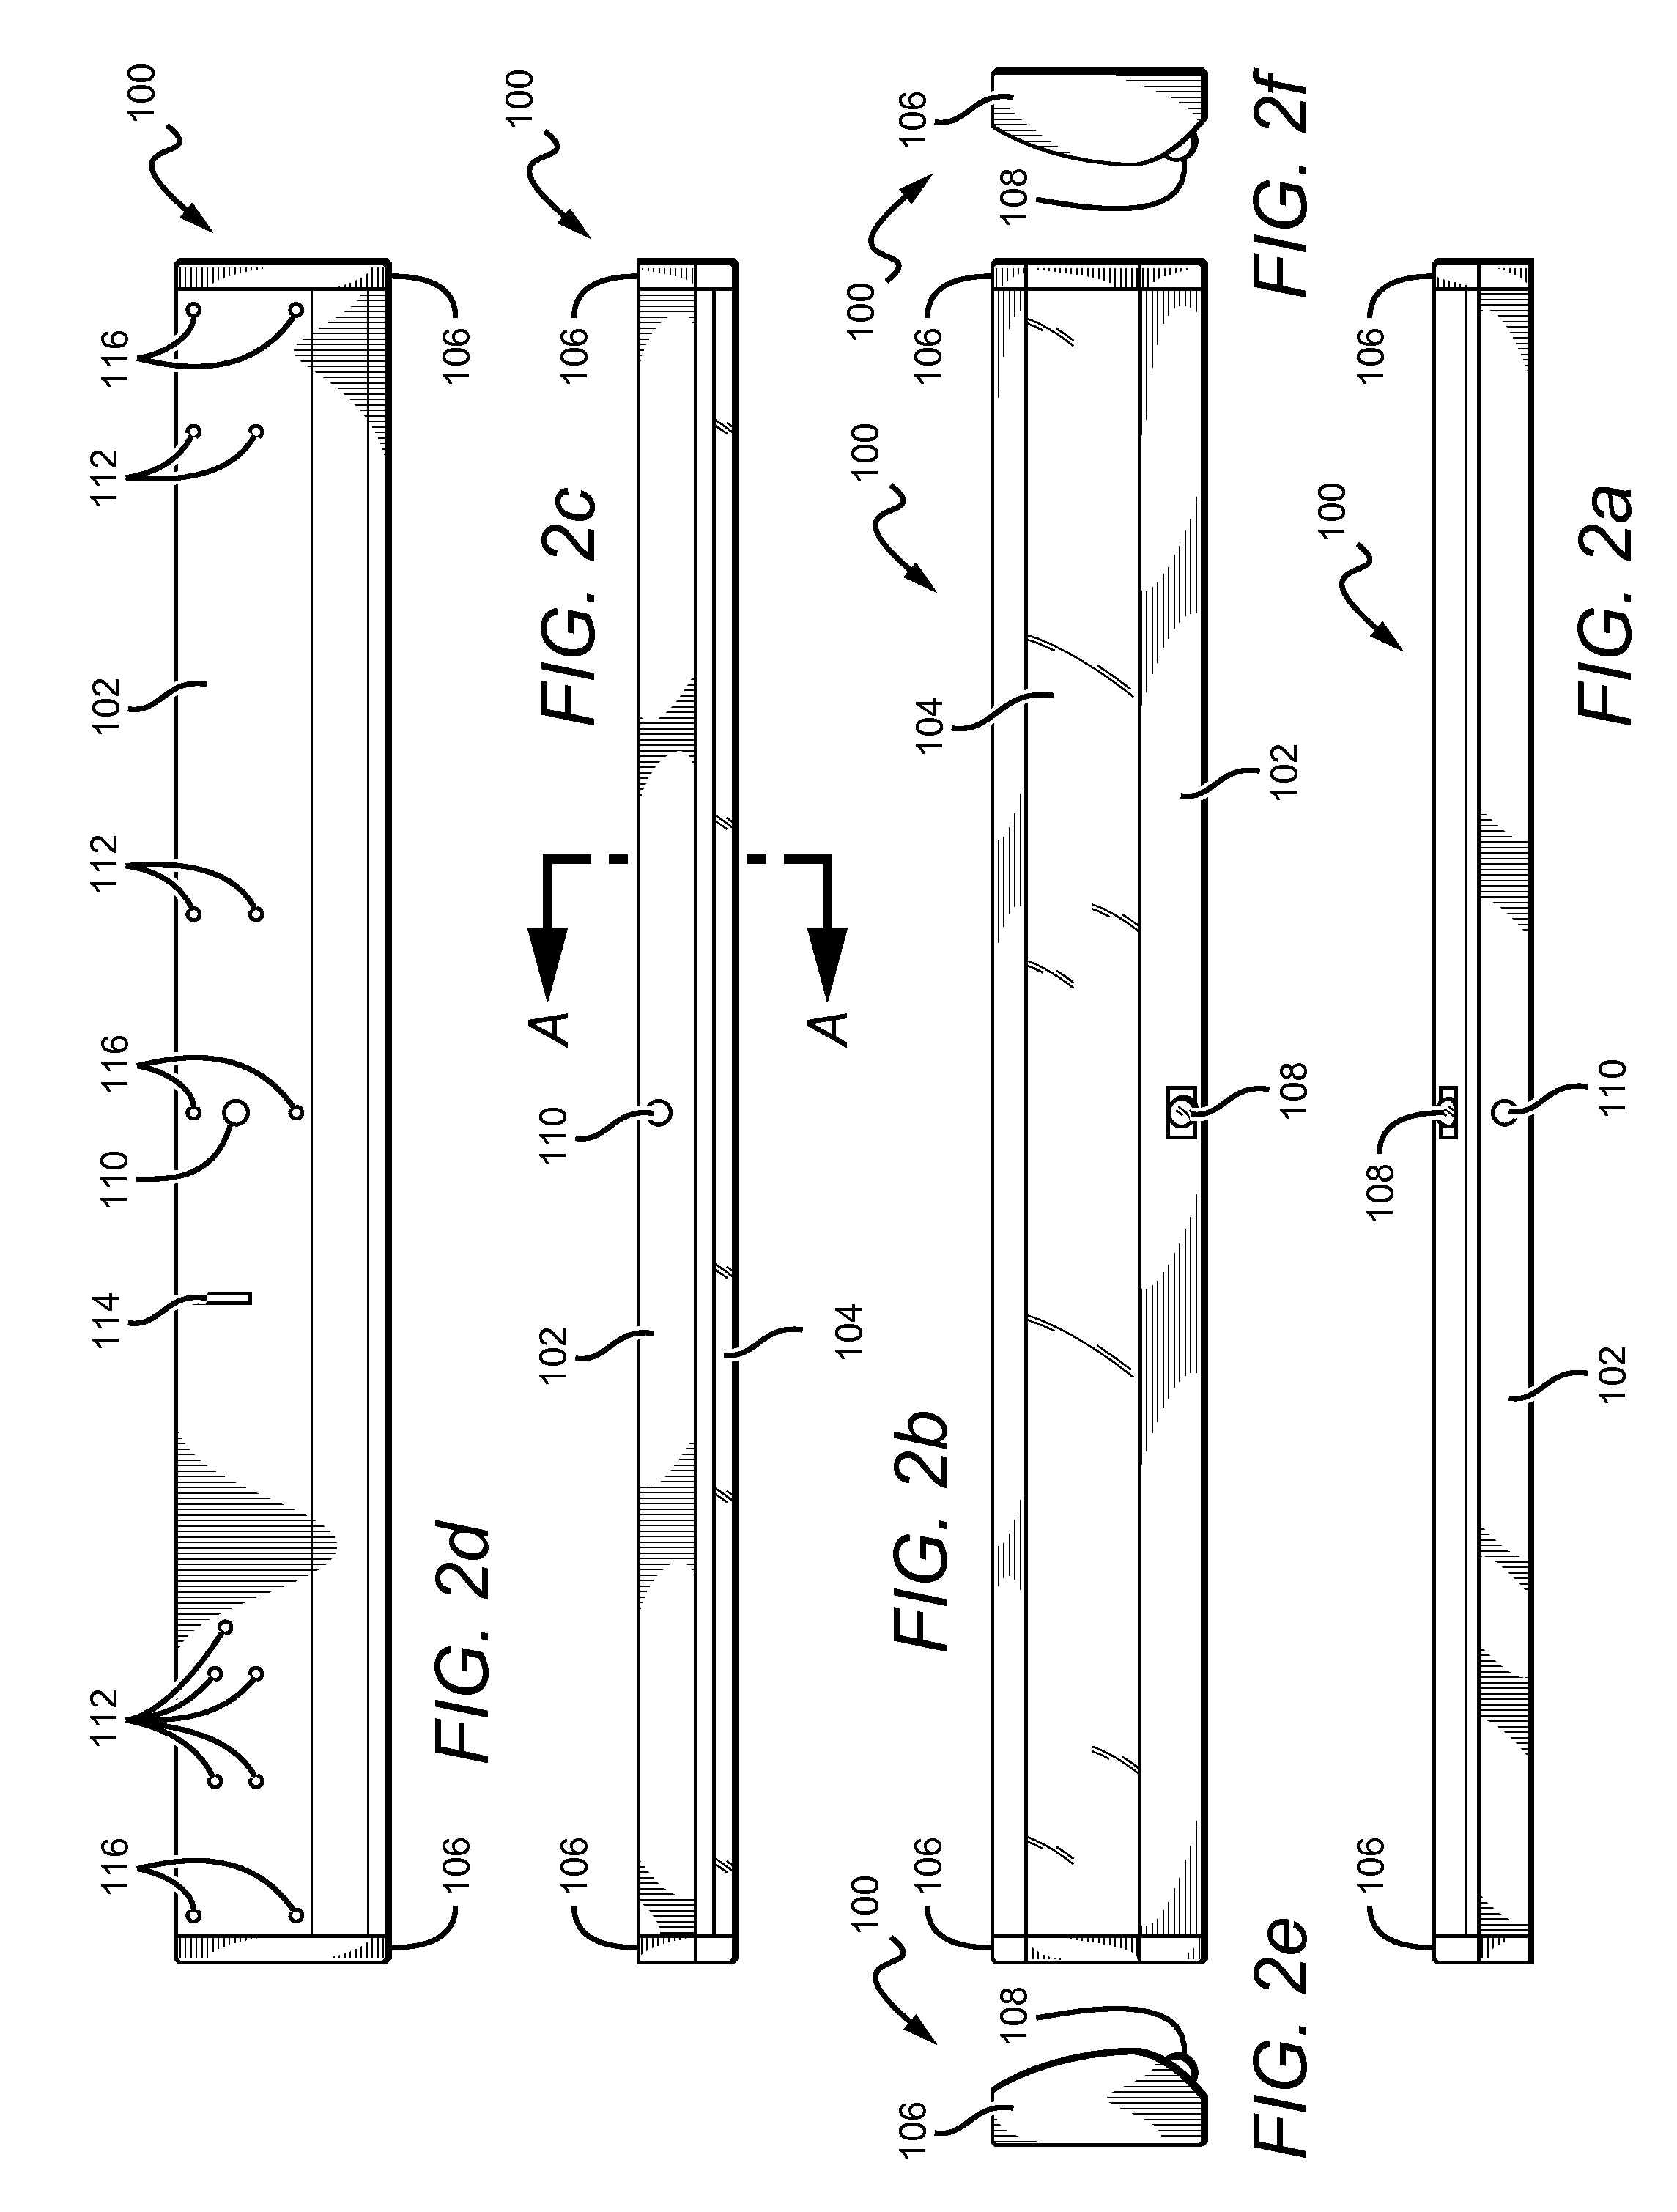 Linear solid state lighting fixture with asymmetric distribution